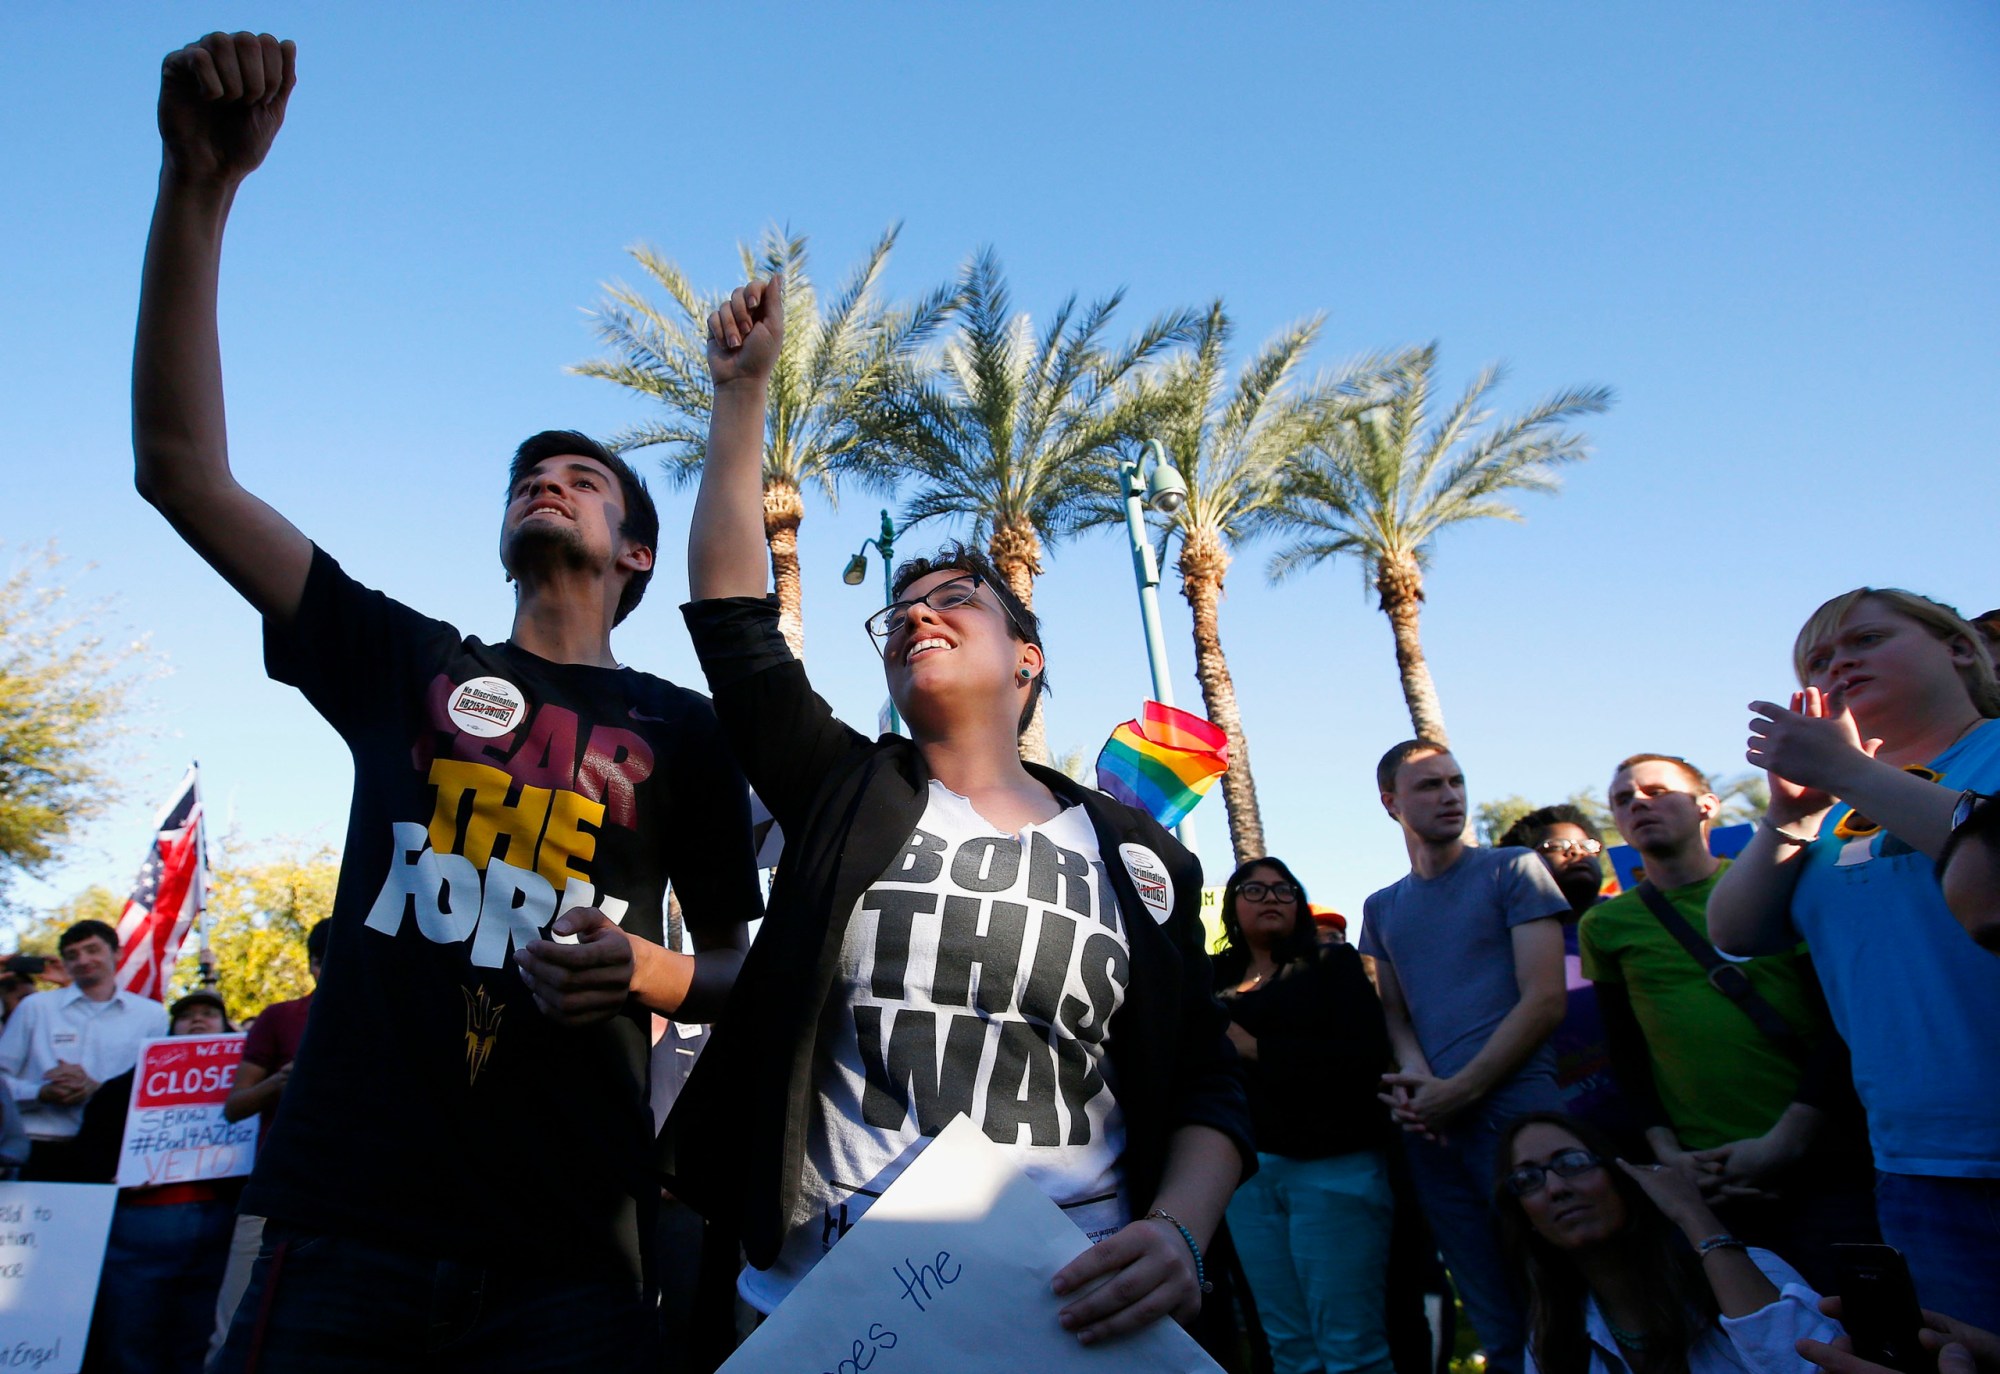 Anthony Musa and Brianna Pantillione joined nearly 250 LGBT rights supporters who protested S.B. 1062 at the Arizona State Capitol. (AP/Ross D. Franklin)